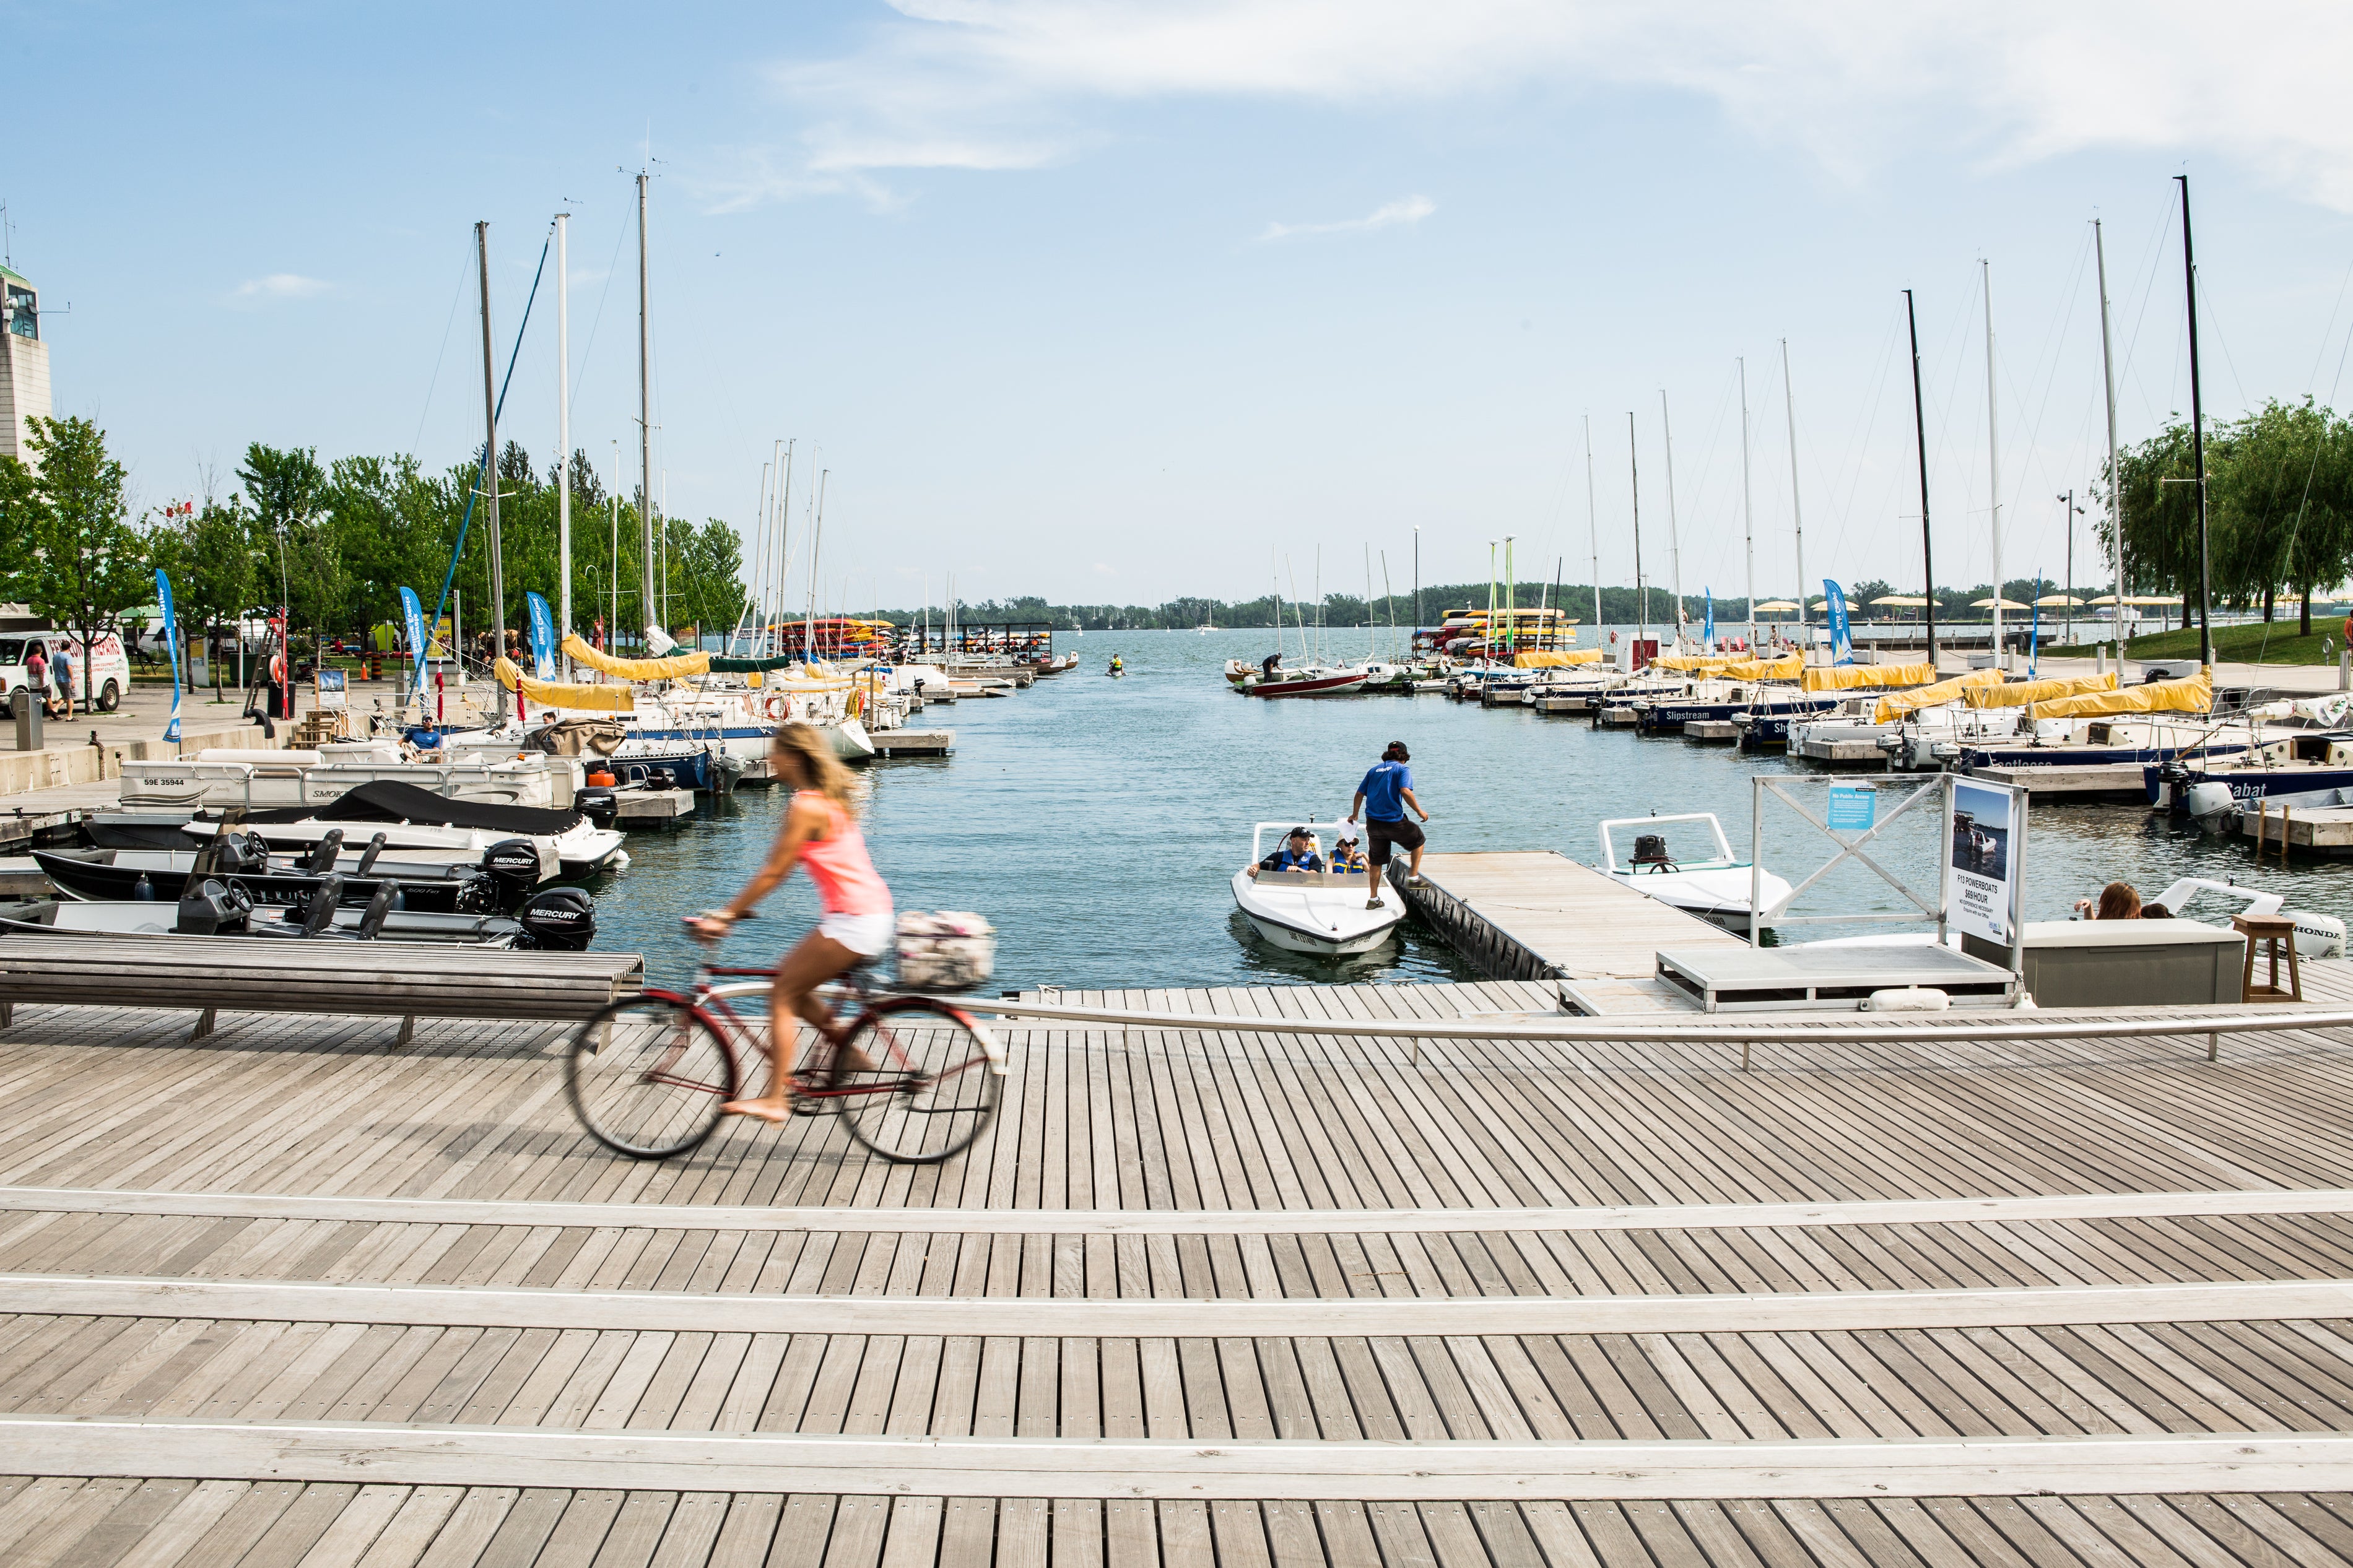 a view of the Rees WaveDeck next to Lake Ontario with boats and canoes in the water